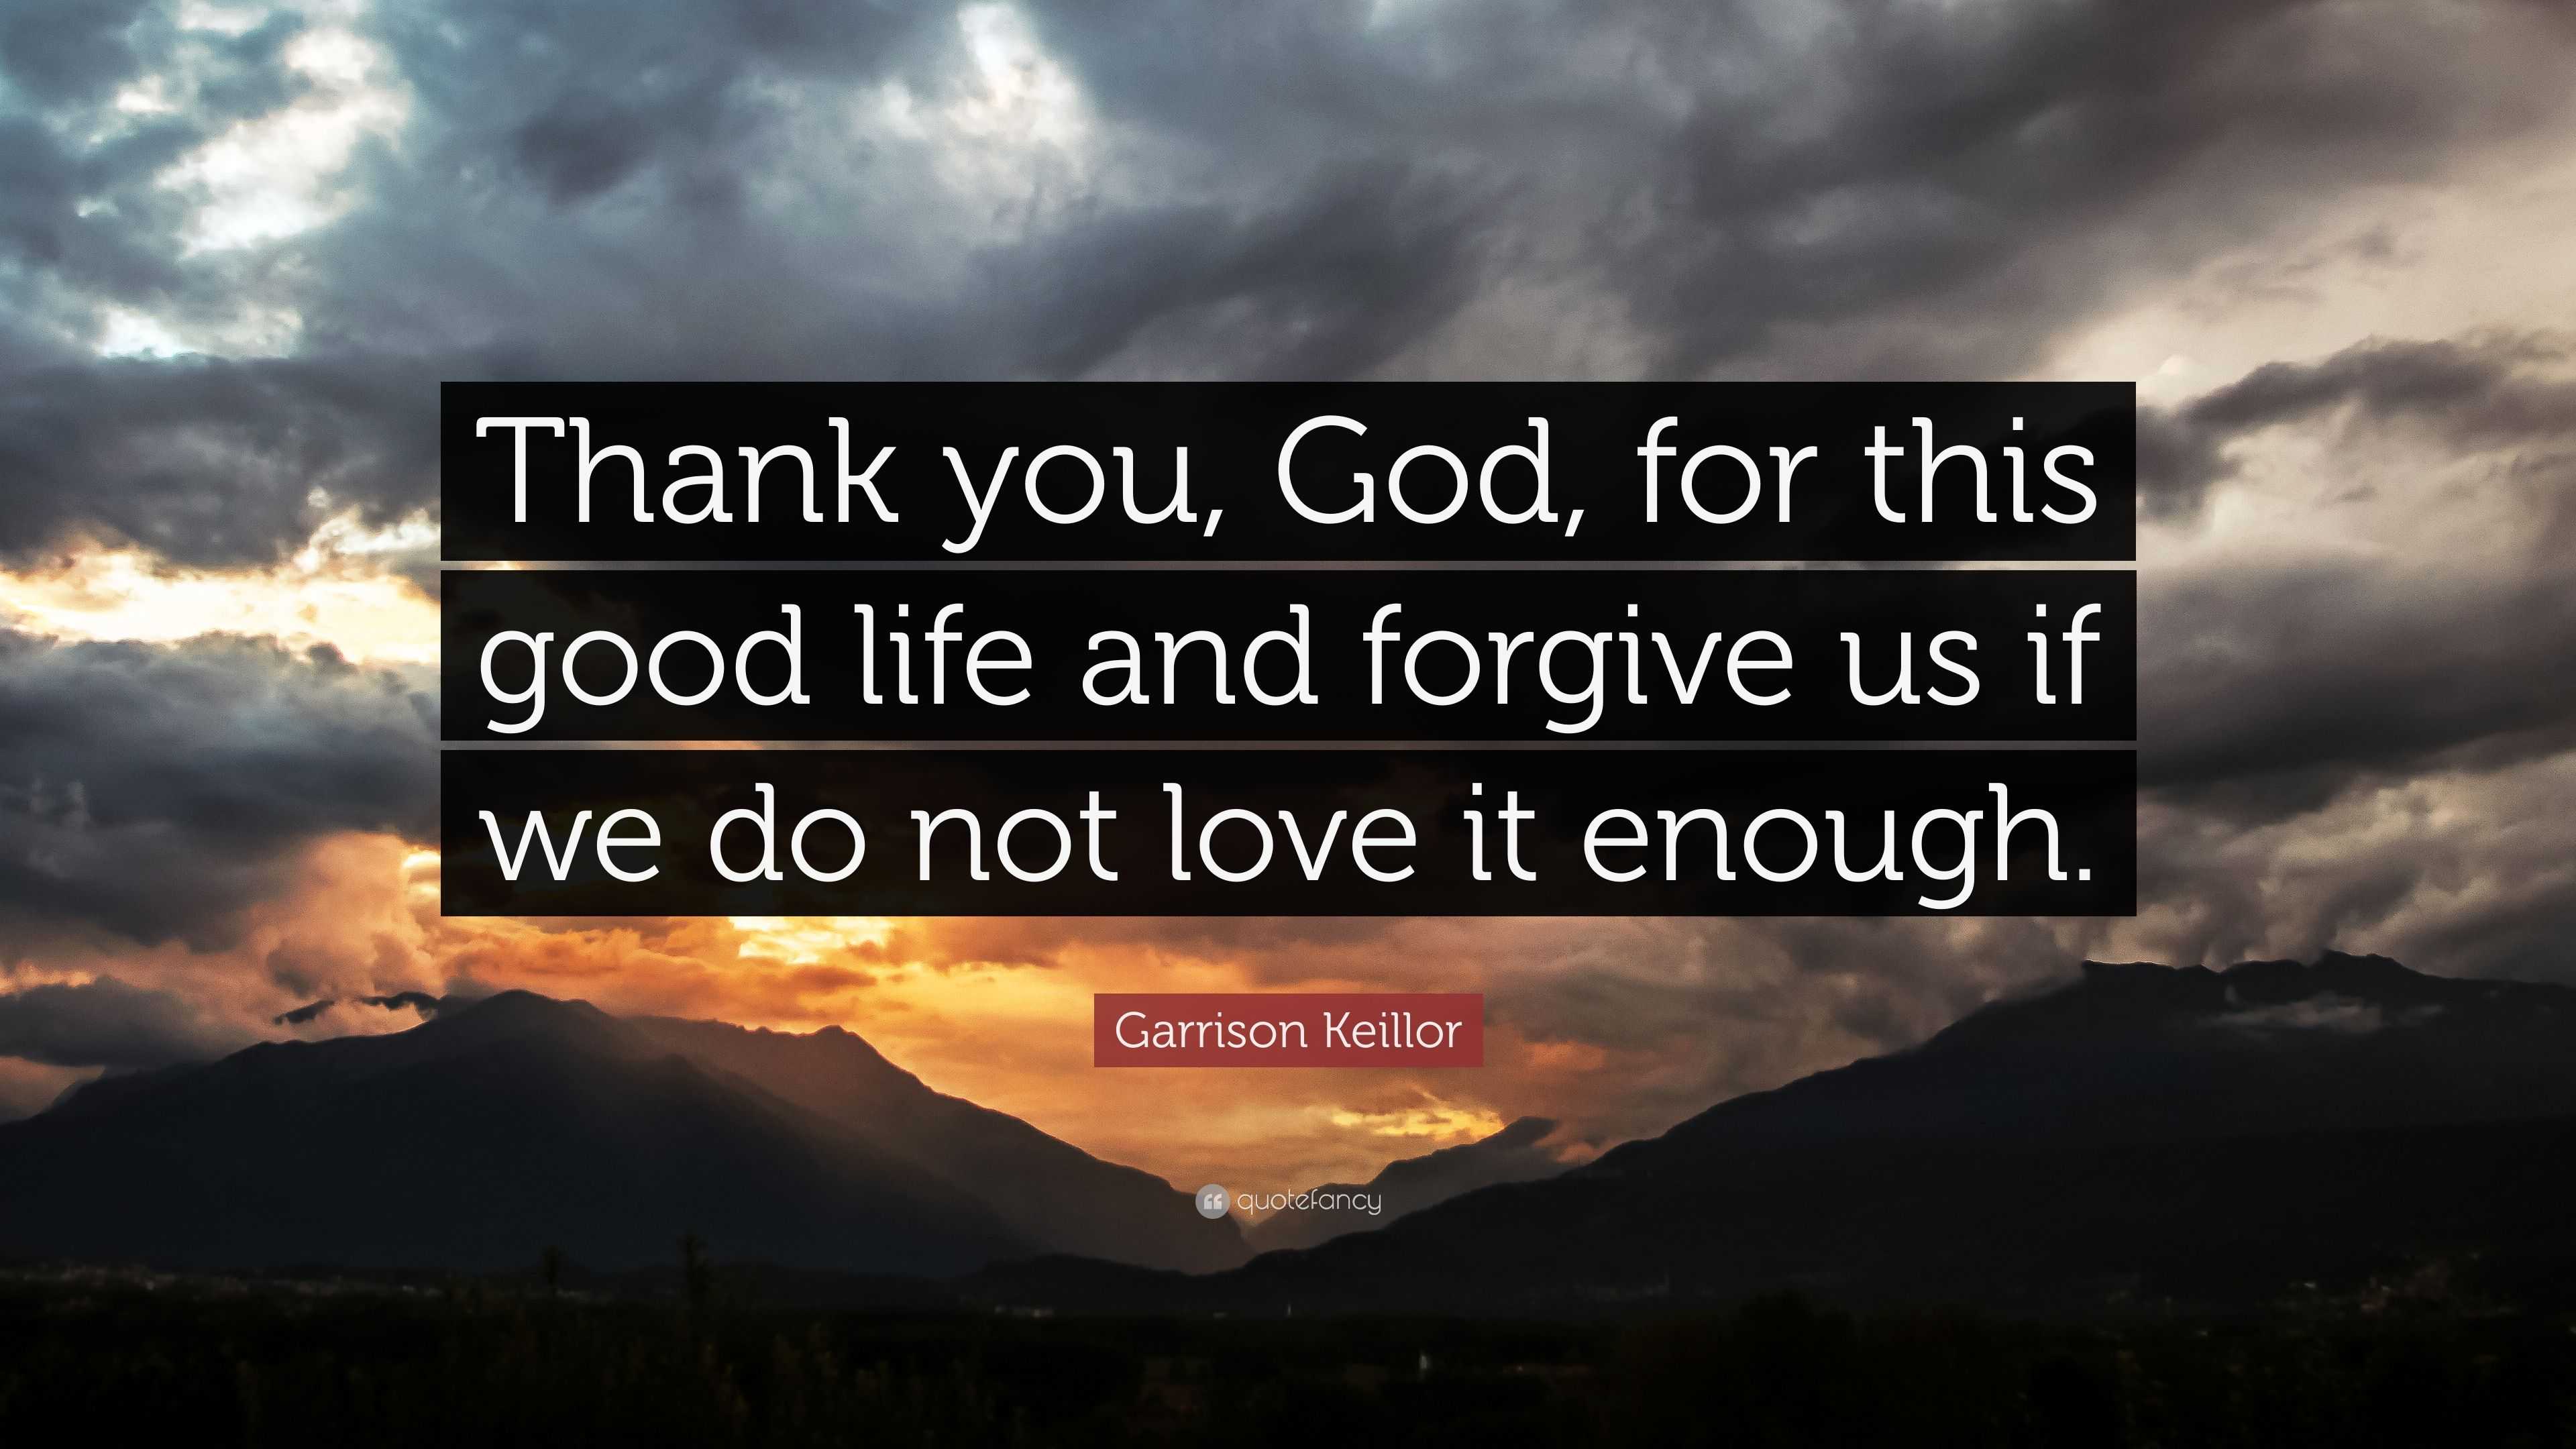 Garrison Keillor Quote “Thank you, God, for this good